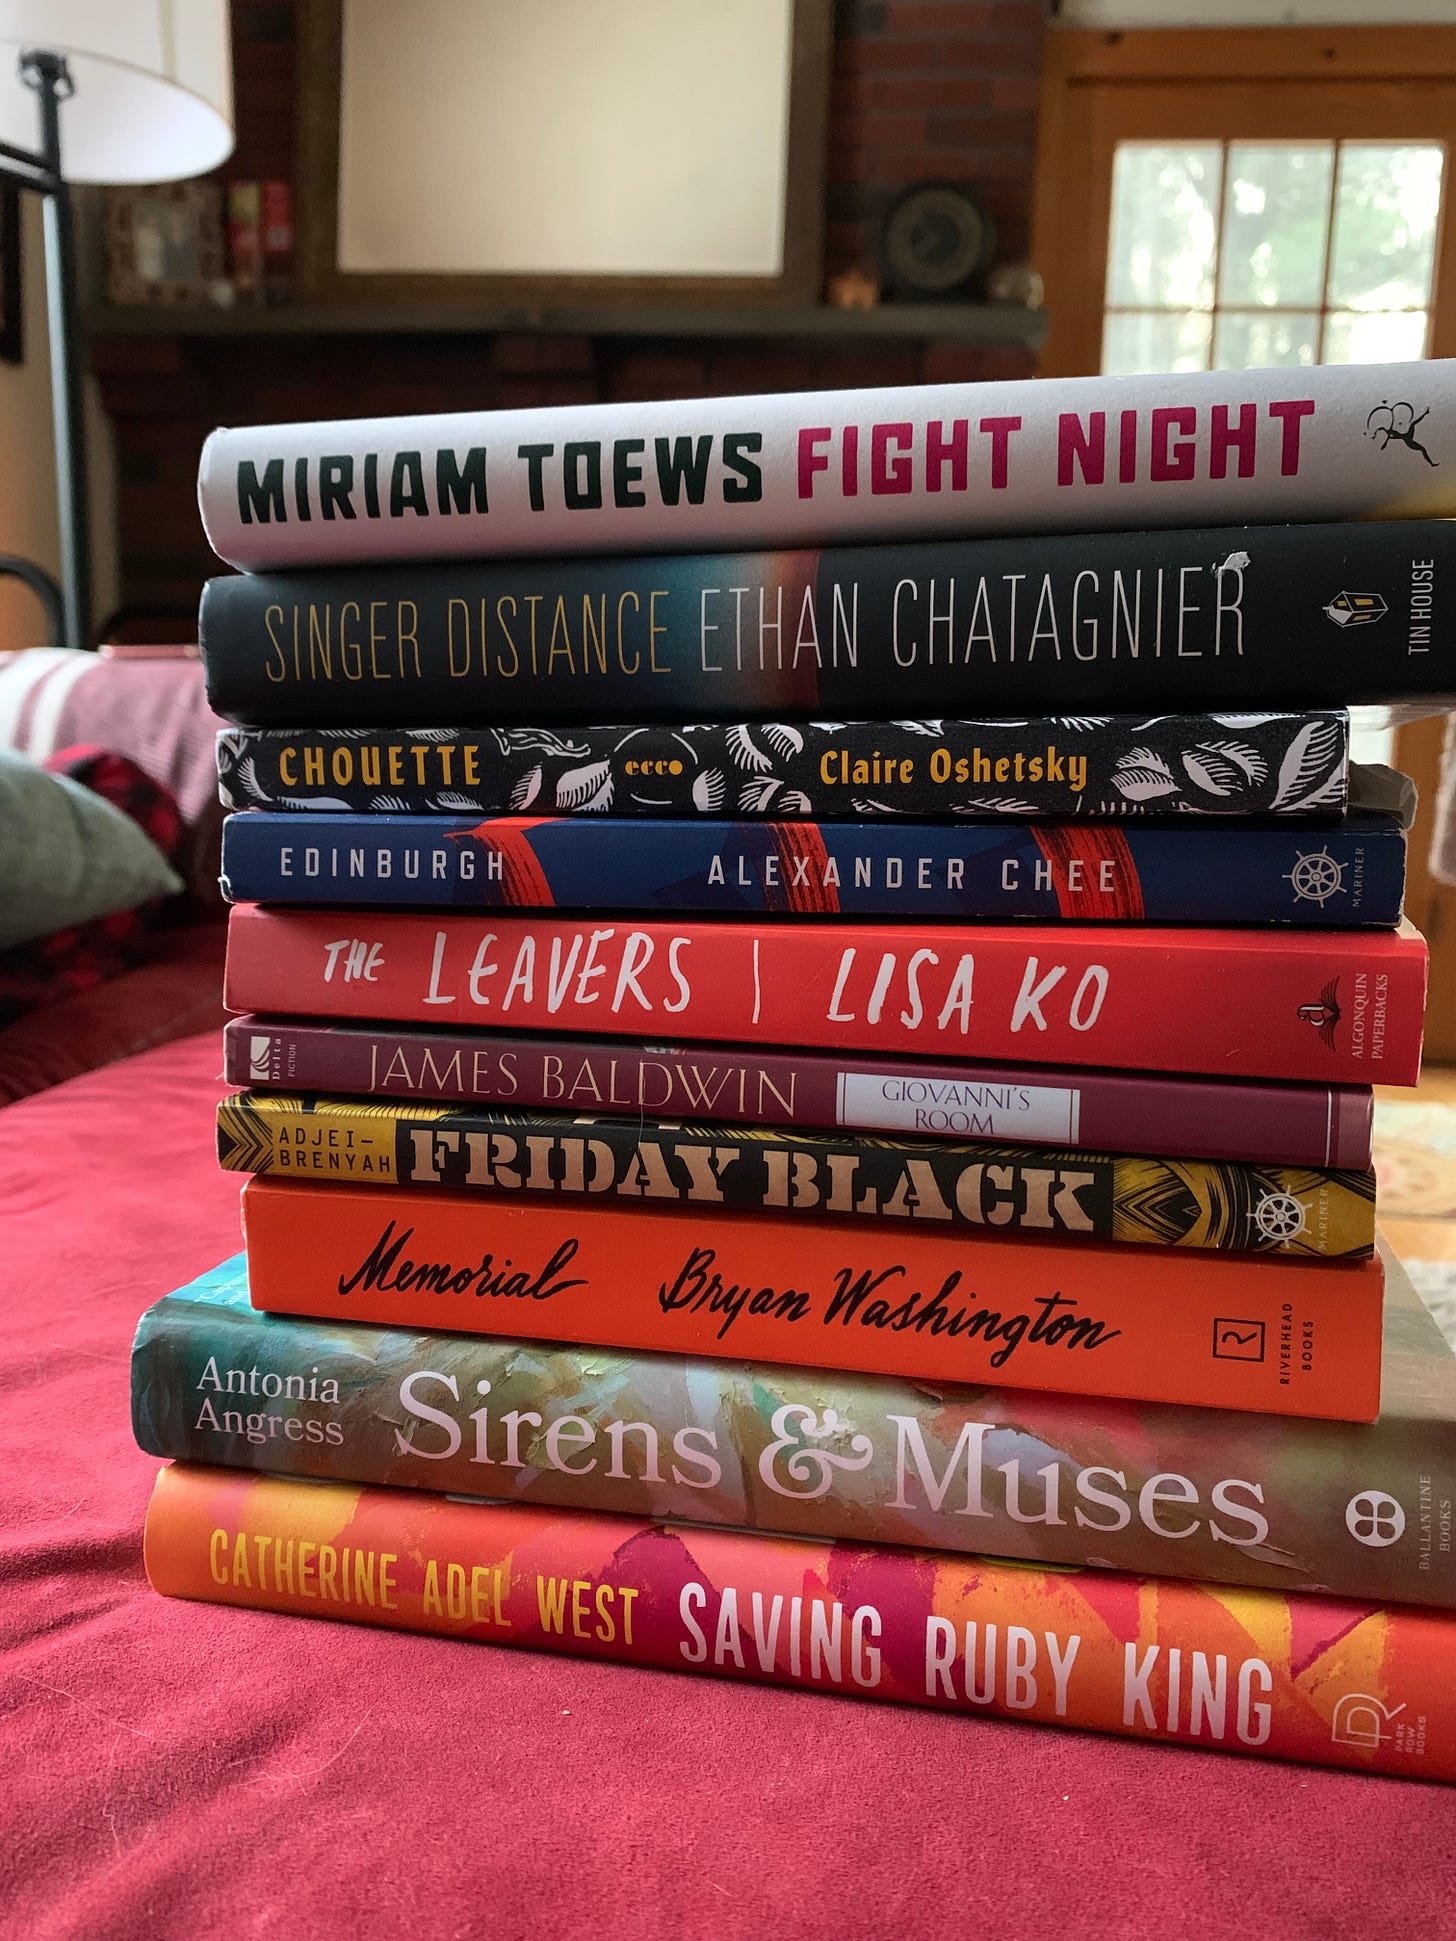 A stack of books on a red ottoman. Books from top to bottom include FIGHT NIGHT by Miriam Toews, SINGER DISTANCE by Ethan Chatagnier, CHOUETTE by Claire Oshetsky, EDINBURGH by Alexander Chee, THE LEAVERS by Lisa Ko, GIOVANNI'S ROOM by James Baldwin, FRIDAY BLACK by Nan Kwame Adjei-Brenyah, MEMORIAL by Bryan Washington, SIRENS & MUSES by Antonia Angress, and SAVING RUBY KING by Catherine Adel West